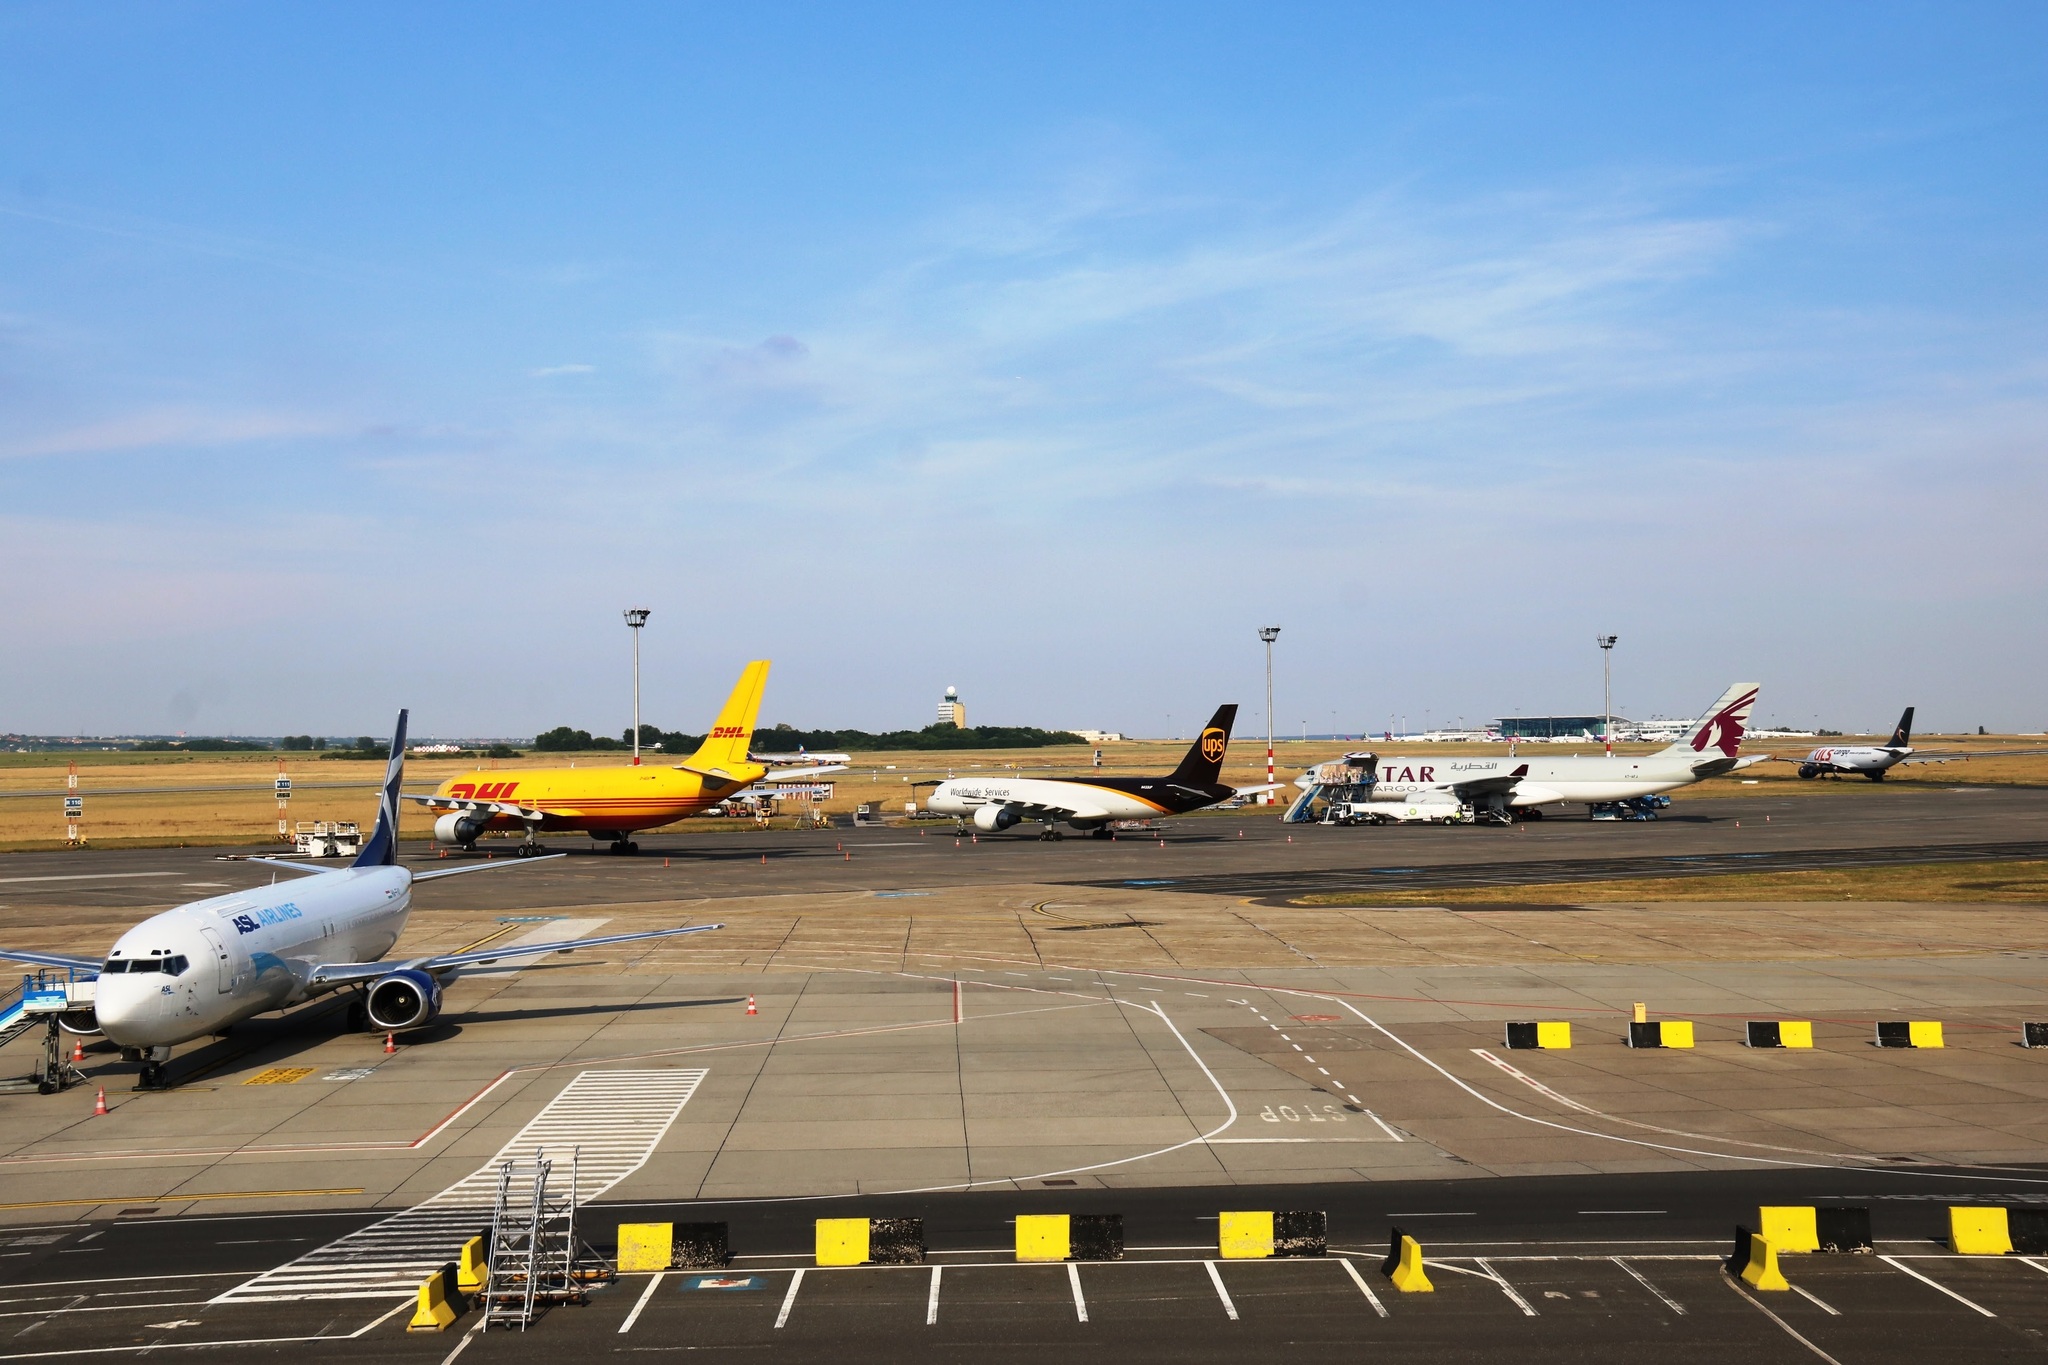 Outstanding cargo volume at Budapest Airport in 2016